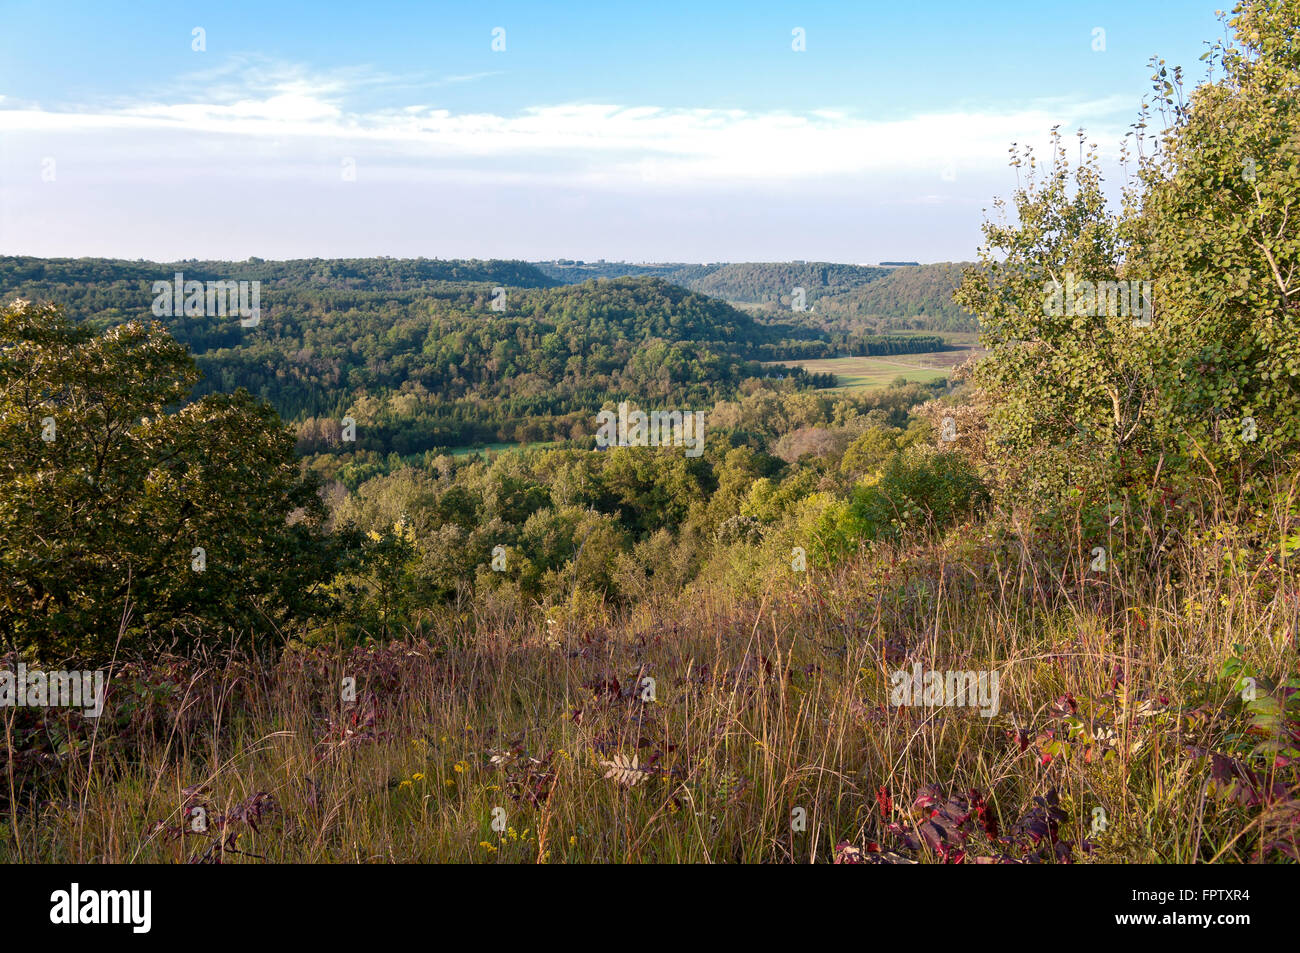 inside morgan coulee state natural area atop bluffs overlooking rush river valley outside maiden rock wisconsin Stock Photo